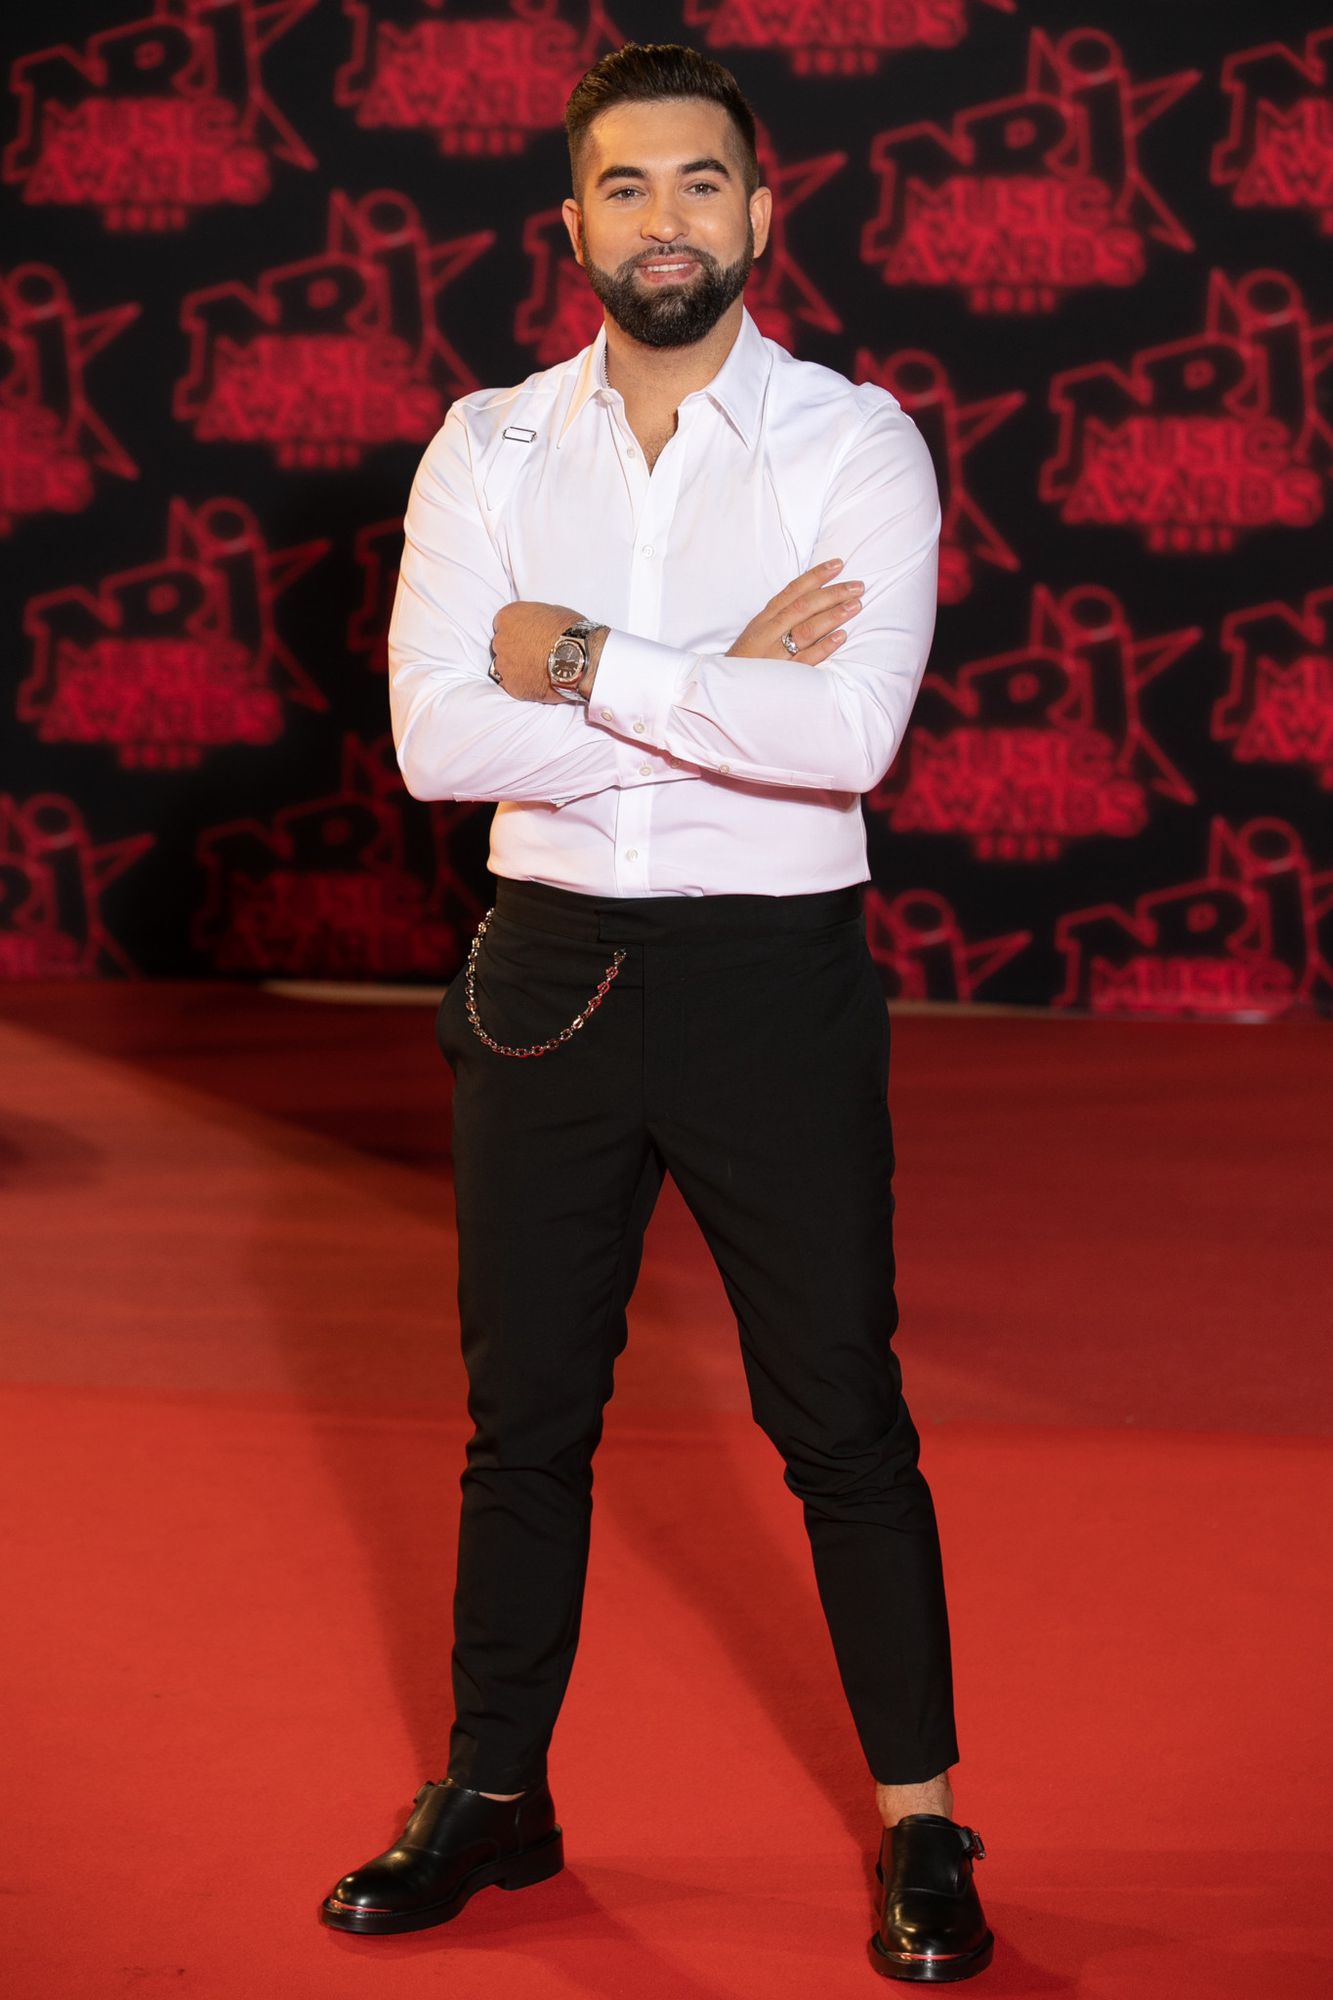 CANNES, FRANCE - NOVEMBER 20: Singer Kendji Girac attends the 22nd NRJ Music Awards on November 20, 2021 in Cannes, France. (Photo by Marc Piasecki/WireImage)